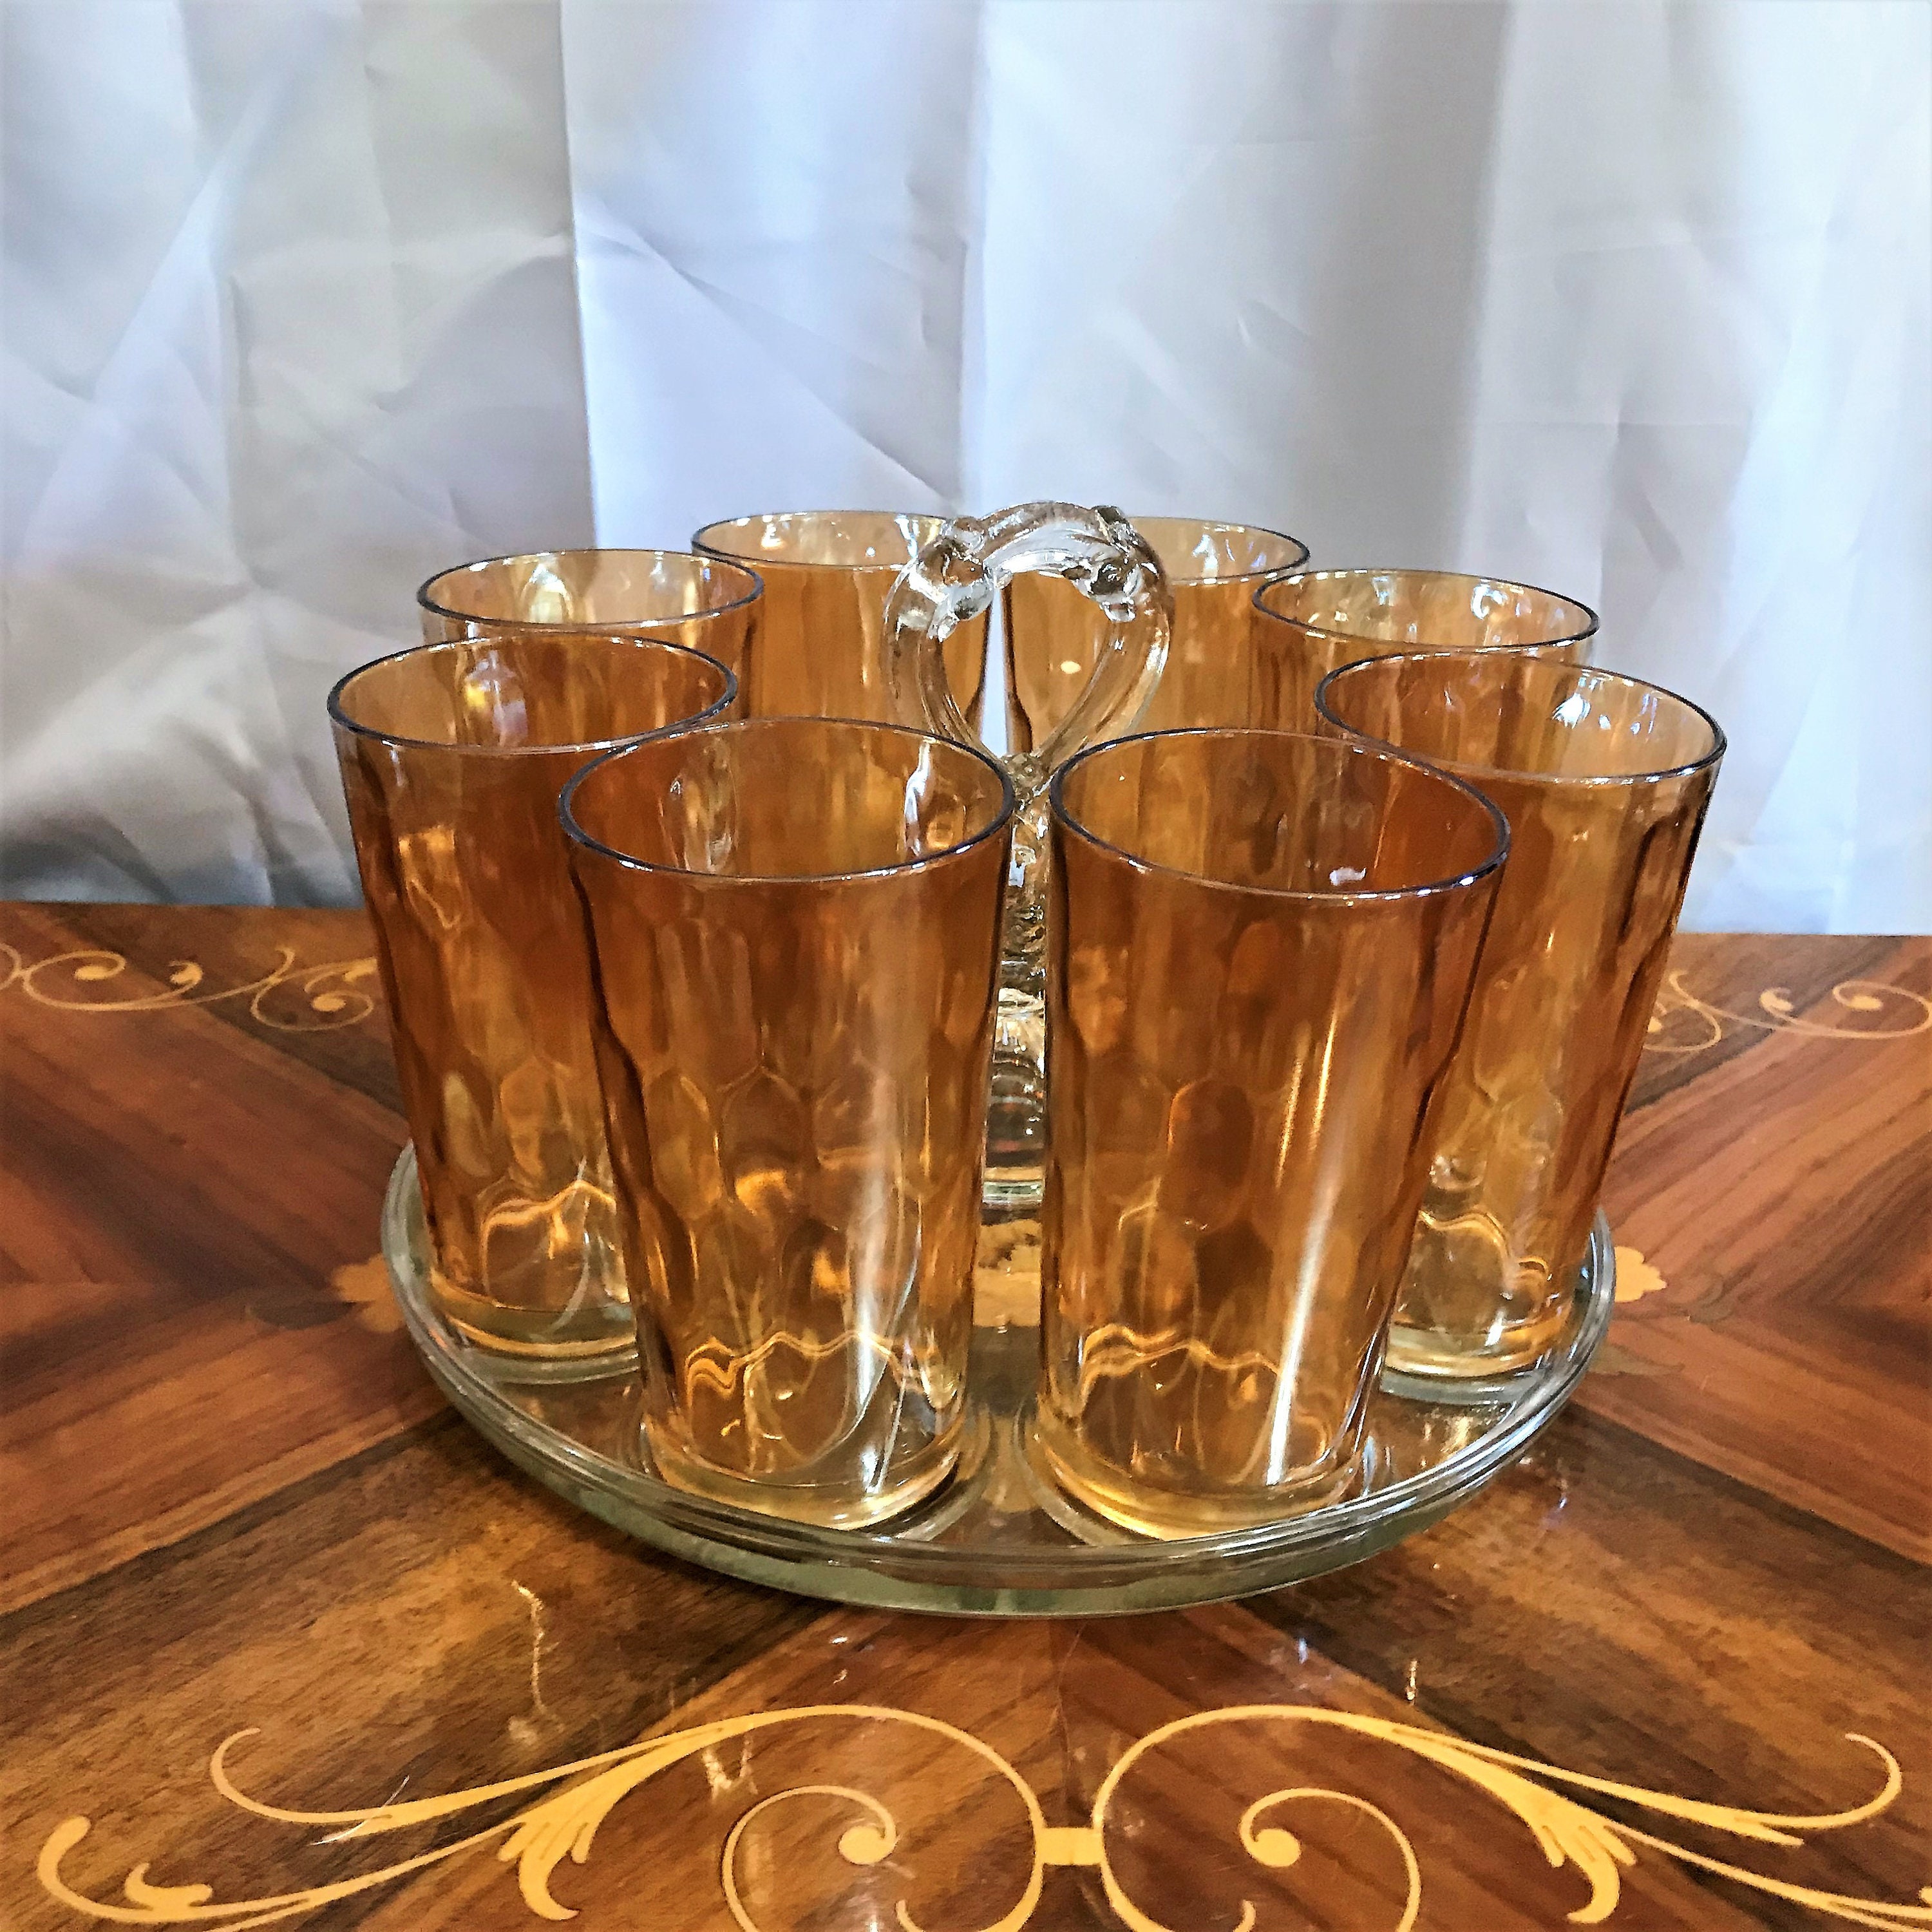 Set of 8 Peach Luster Carnival Glass Tumblers Drinking Glasses